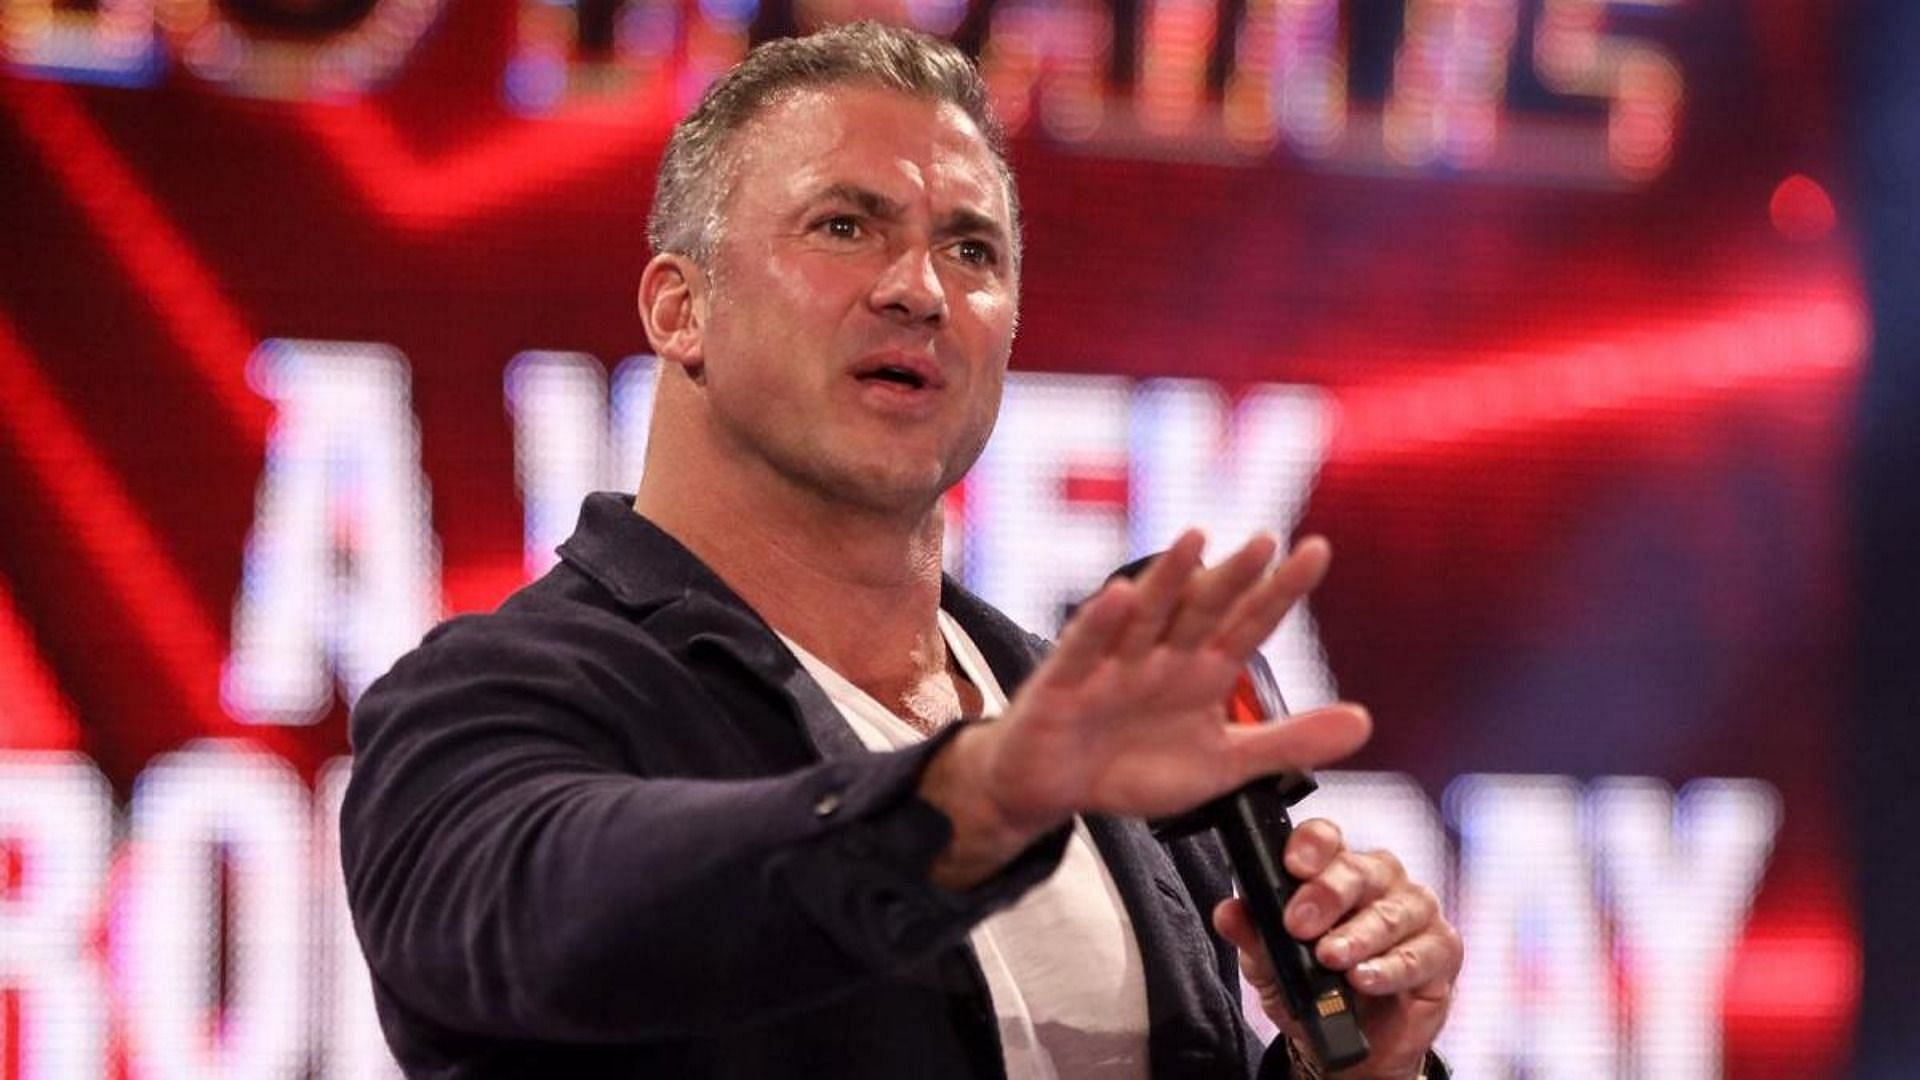 Shane McMahon was shockingly released from his wrestling and booking duties in WWE after the 2022 Royal Rumble